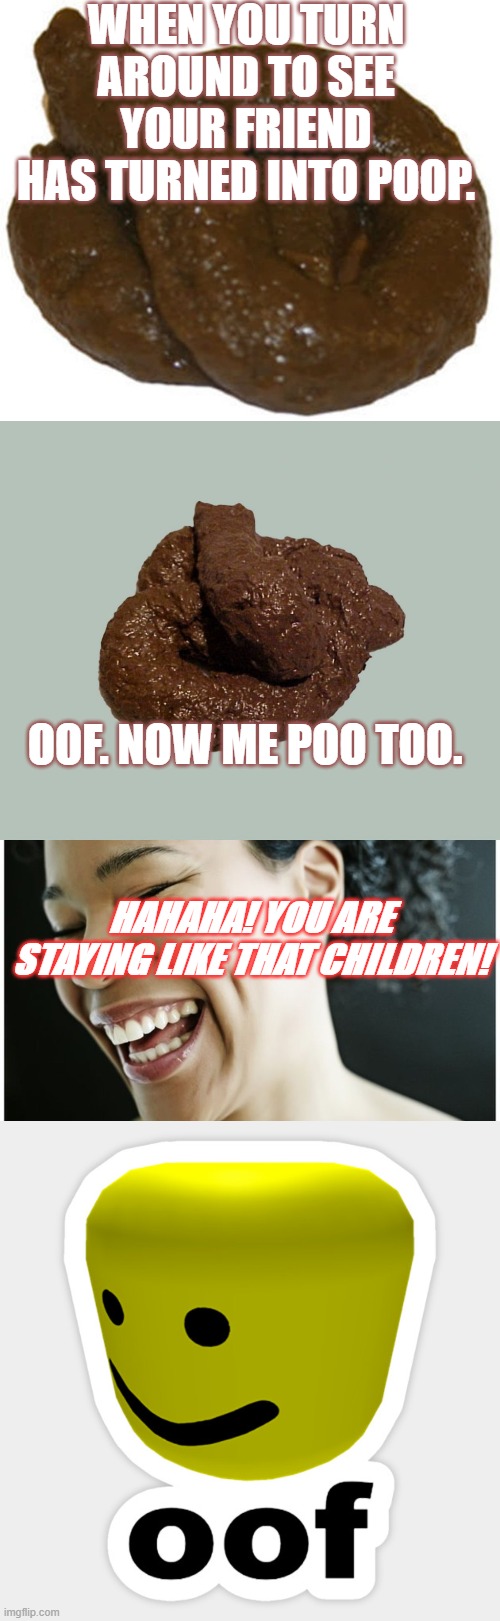 WHEN YOU TURN AROUND TO SEE YOUR FRIEND HAS TURNED INTO POOP. OOF. NOW ME POO TOO. HAHAHA! YOU ARE STAYING LIKE THAT CHILDREN! | image tagged in poop | made w/ Imgflip meme maker